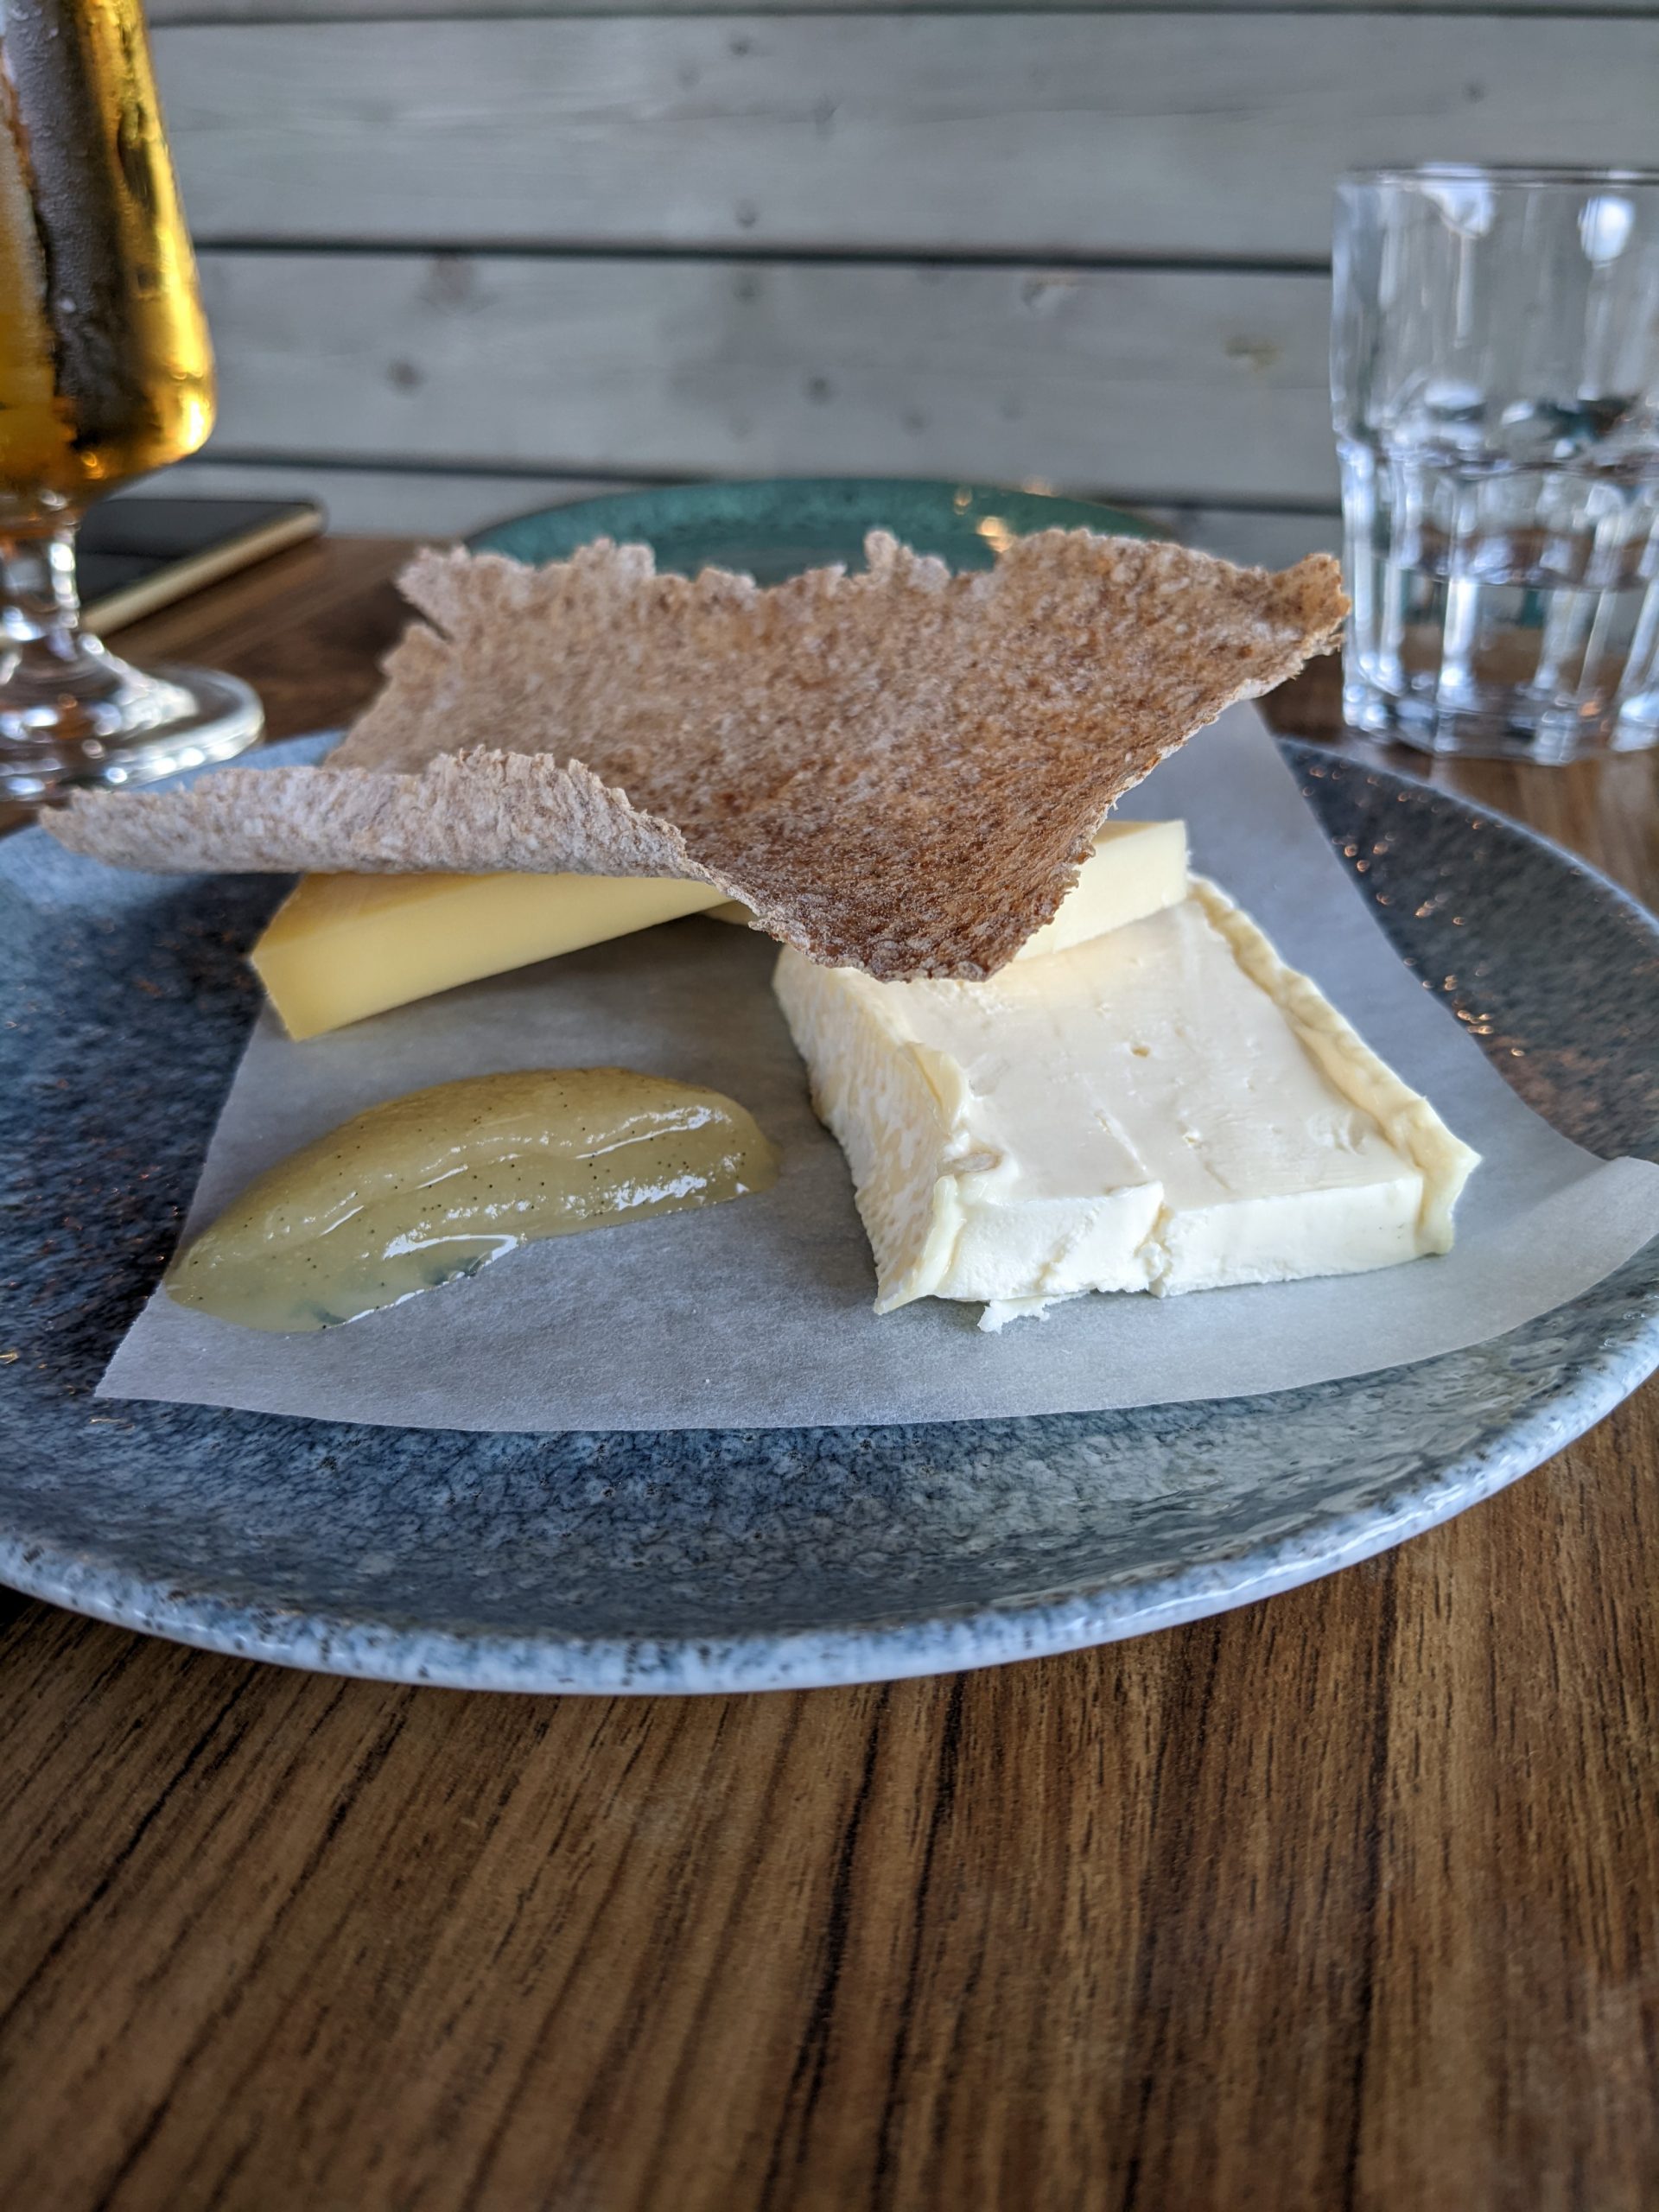 An assortment of cheese sitting on a blue plate with a thin cracker on top